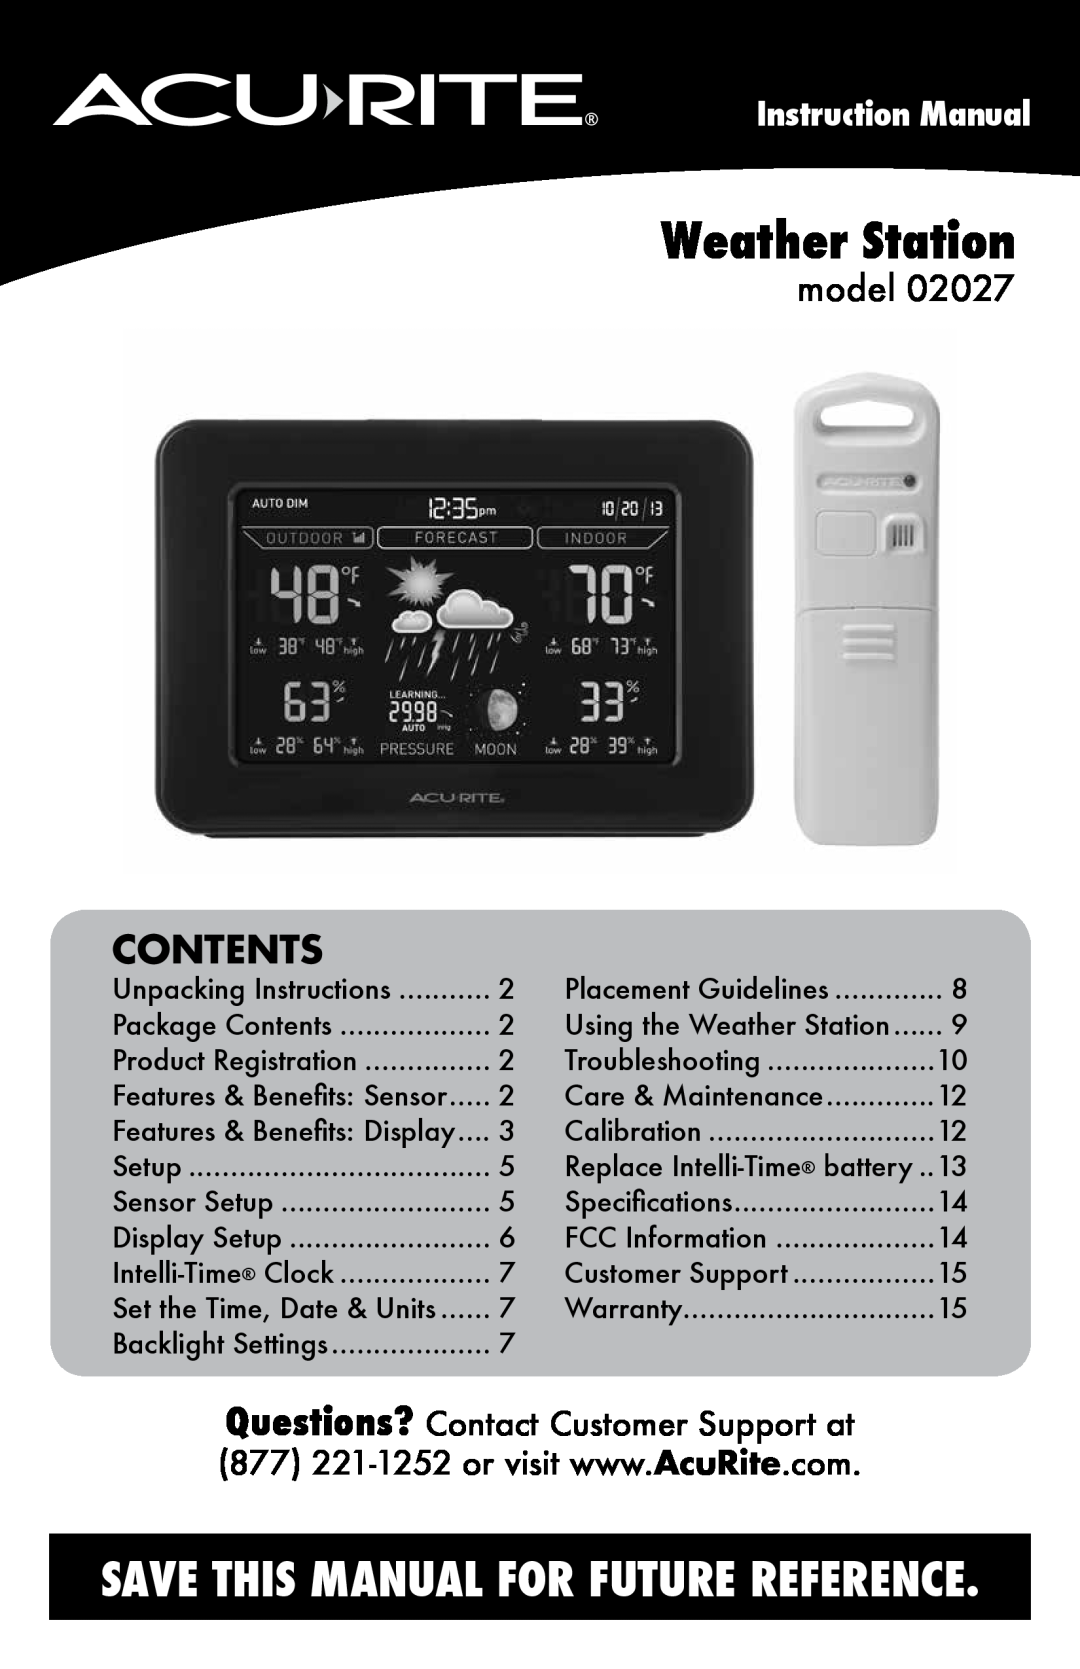 Acu-Rite 2027 instruction manual Contents, model, Weather Station, Save This Manual For Future Reference 